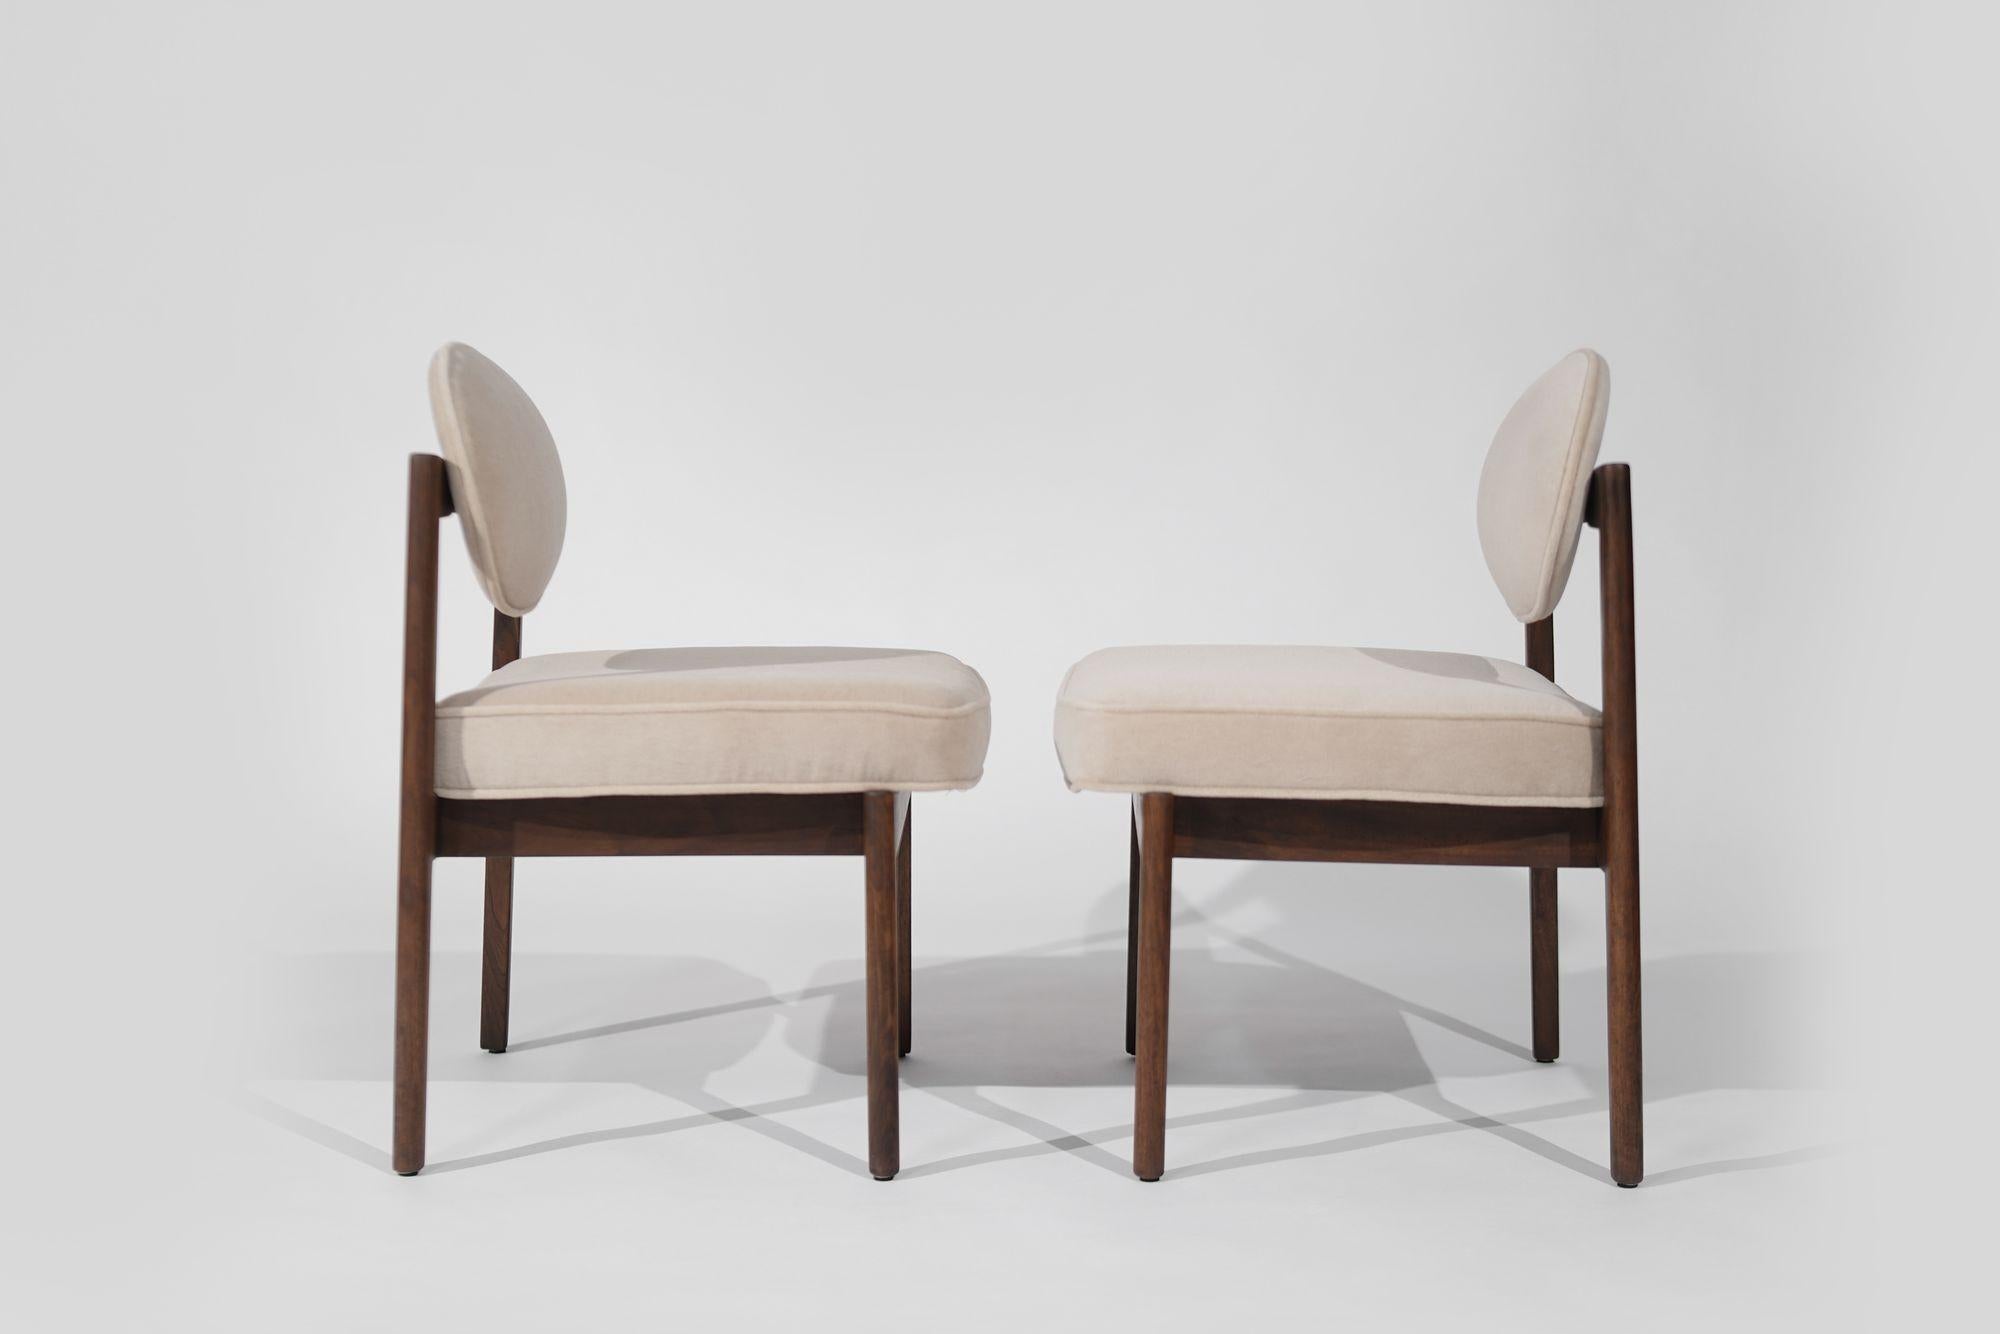 An exquisite pair of mid-century modern side hairs designed by Jens Risom, crafted circa 1960-1969. Meticulously restored, the walnut framework shines with renewed beauty, complemented by a luxurious reupholstery in natural mohair. A perfect blend